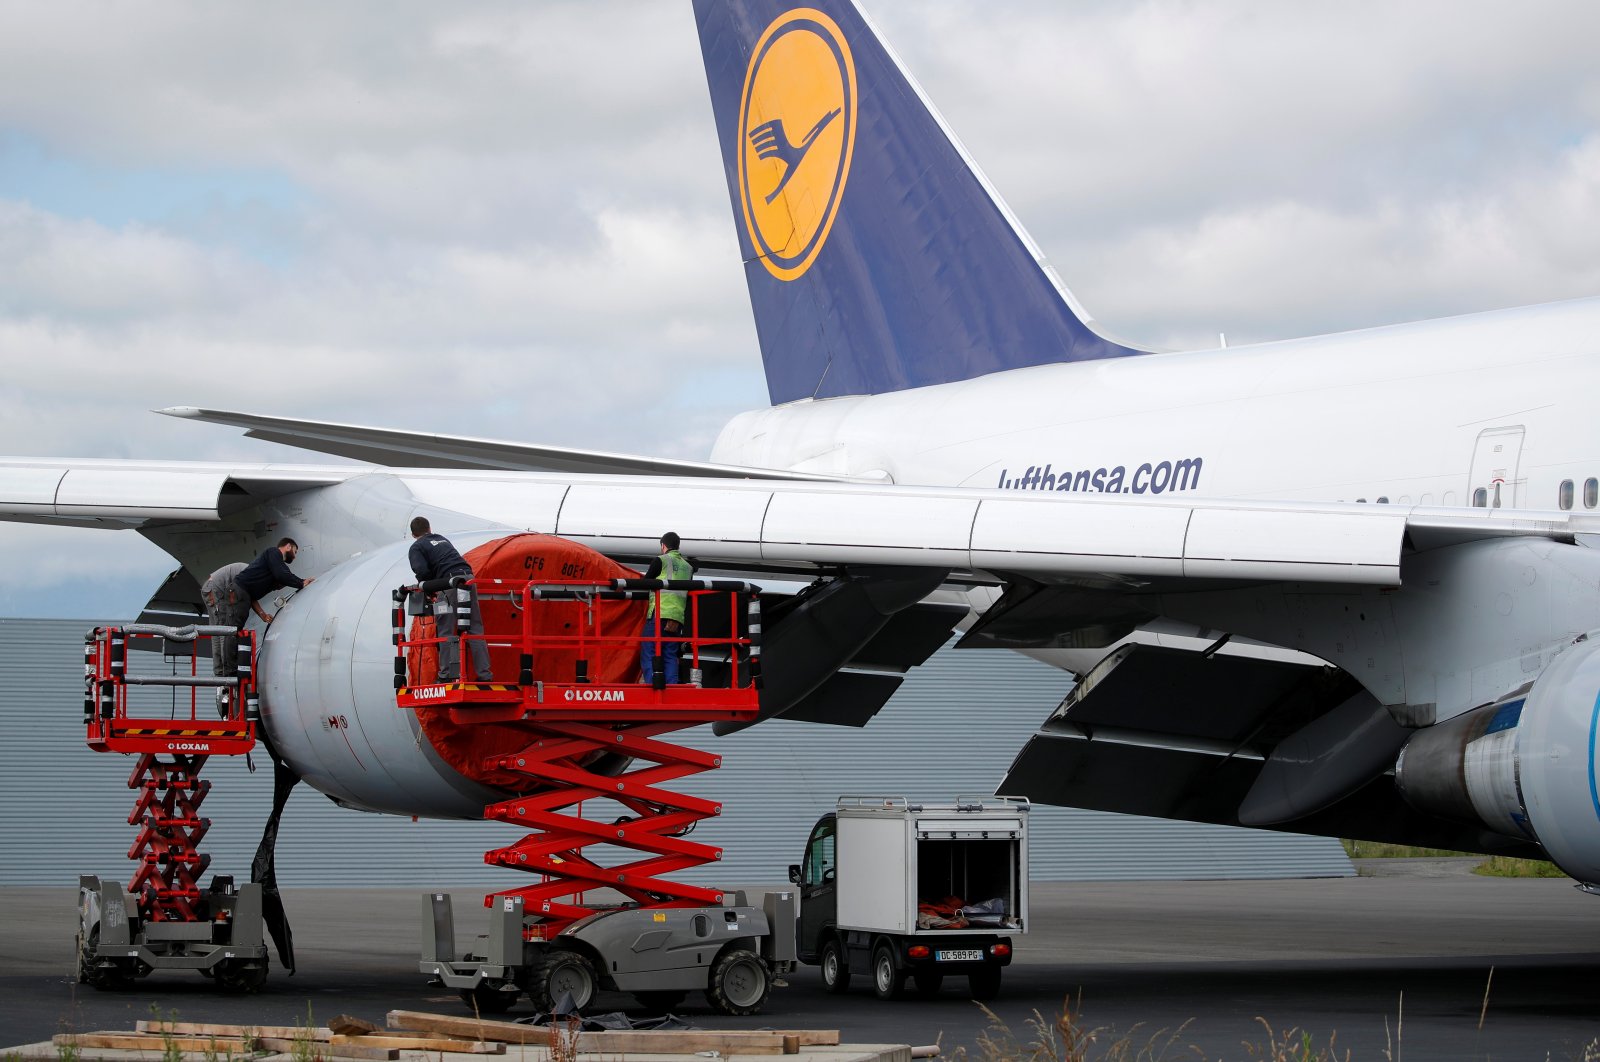 Employees work on a Lufthansa Boeing 747 at French aircraft storage and recycling company Tarmac Aerosave in Tarbes following the coronavirus disease (COVID-19) outbreak in France, June 19, 2020. (Reuters Photo)